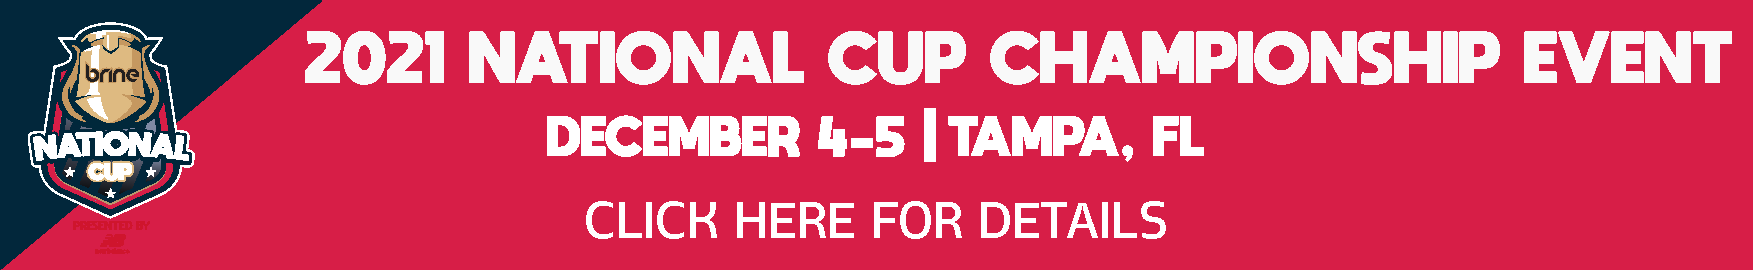 national_cup_banner